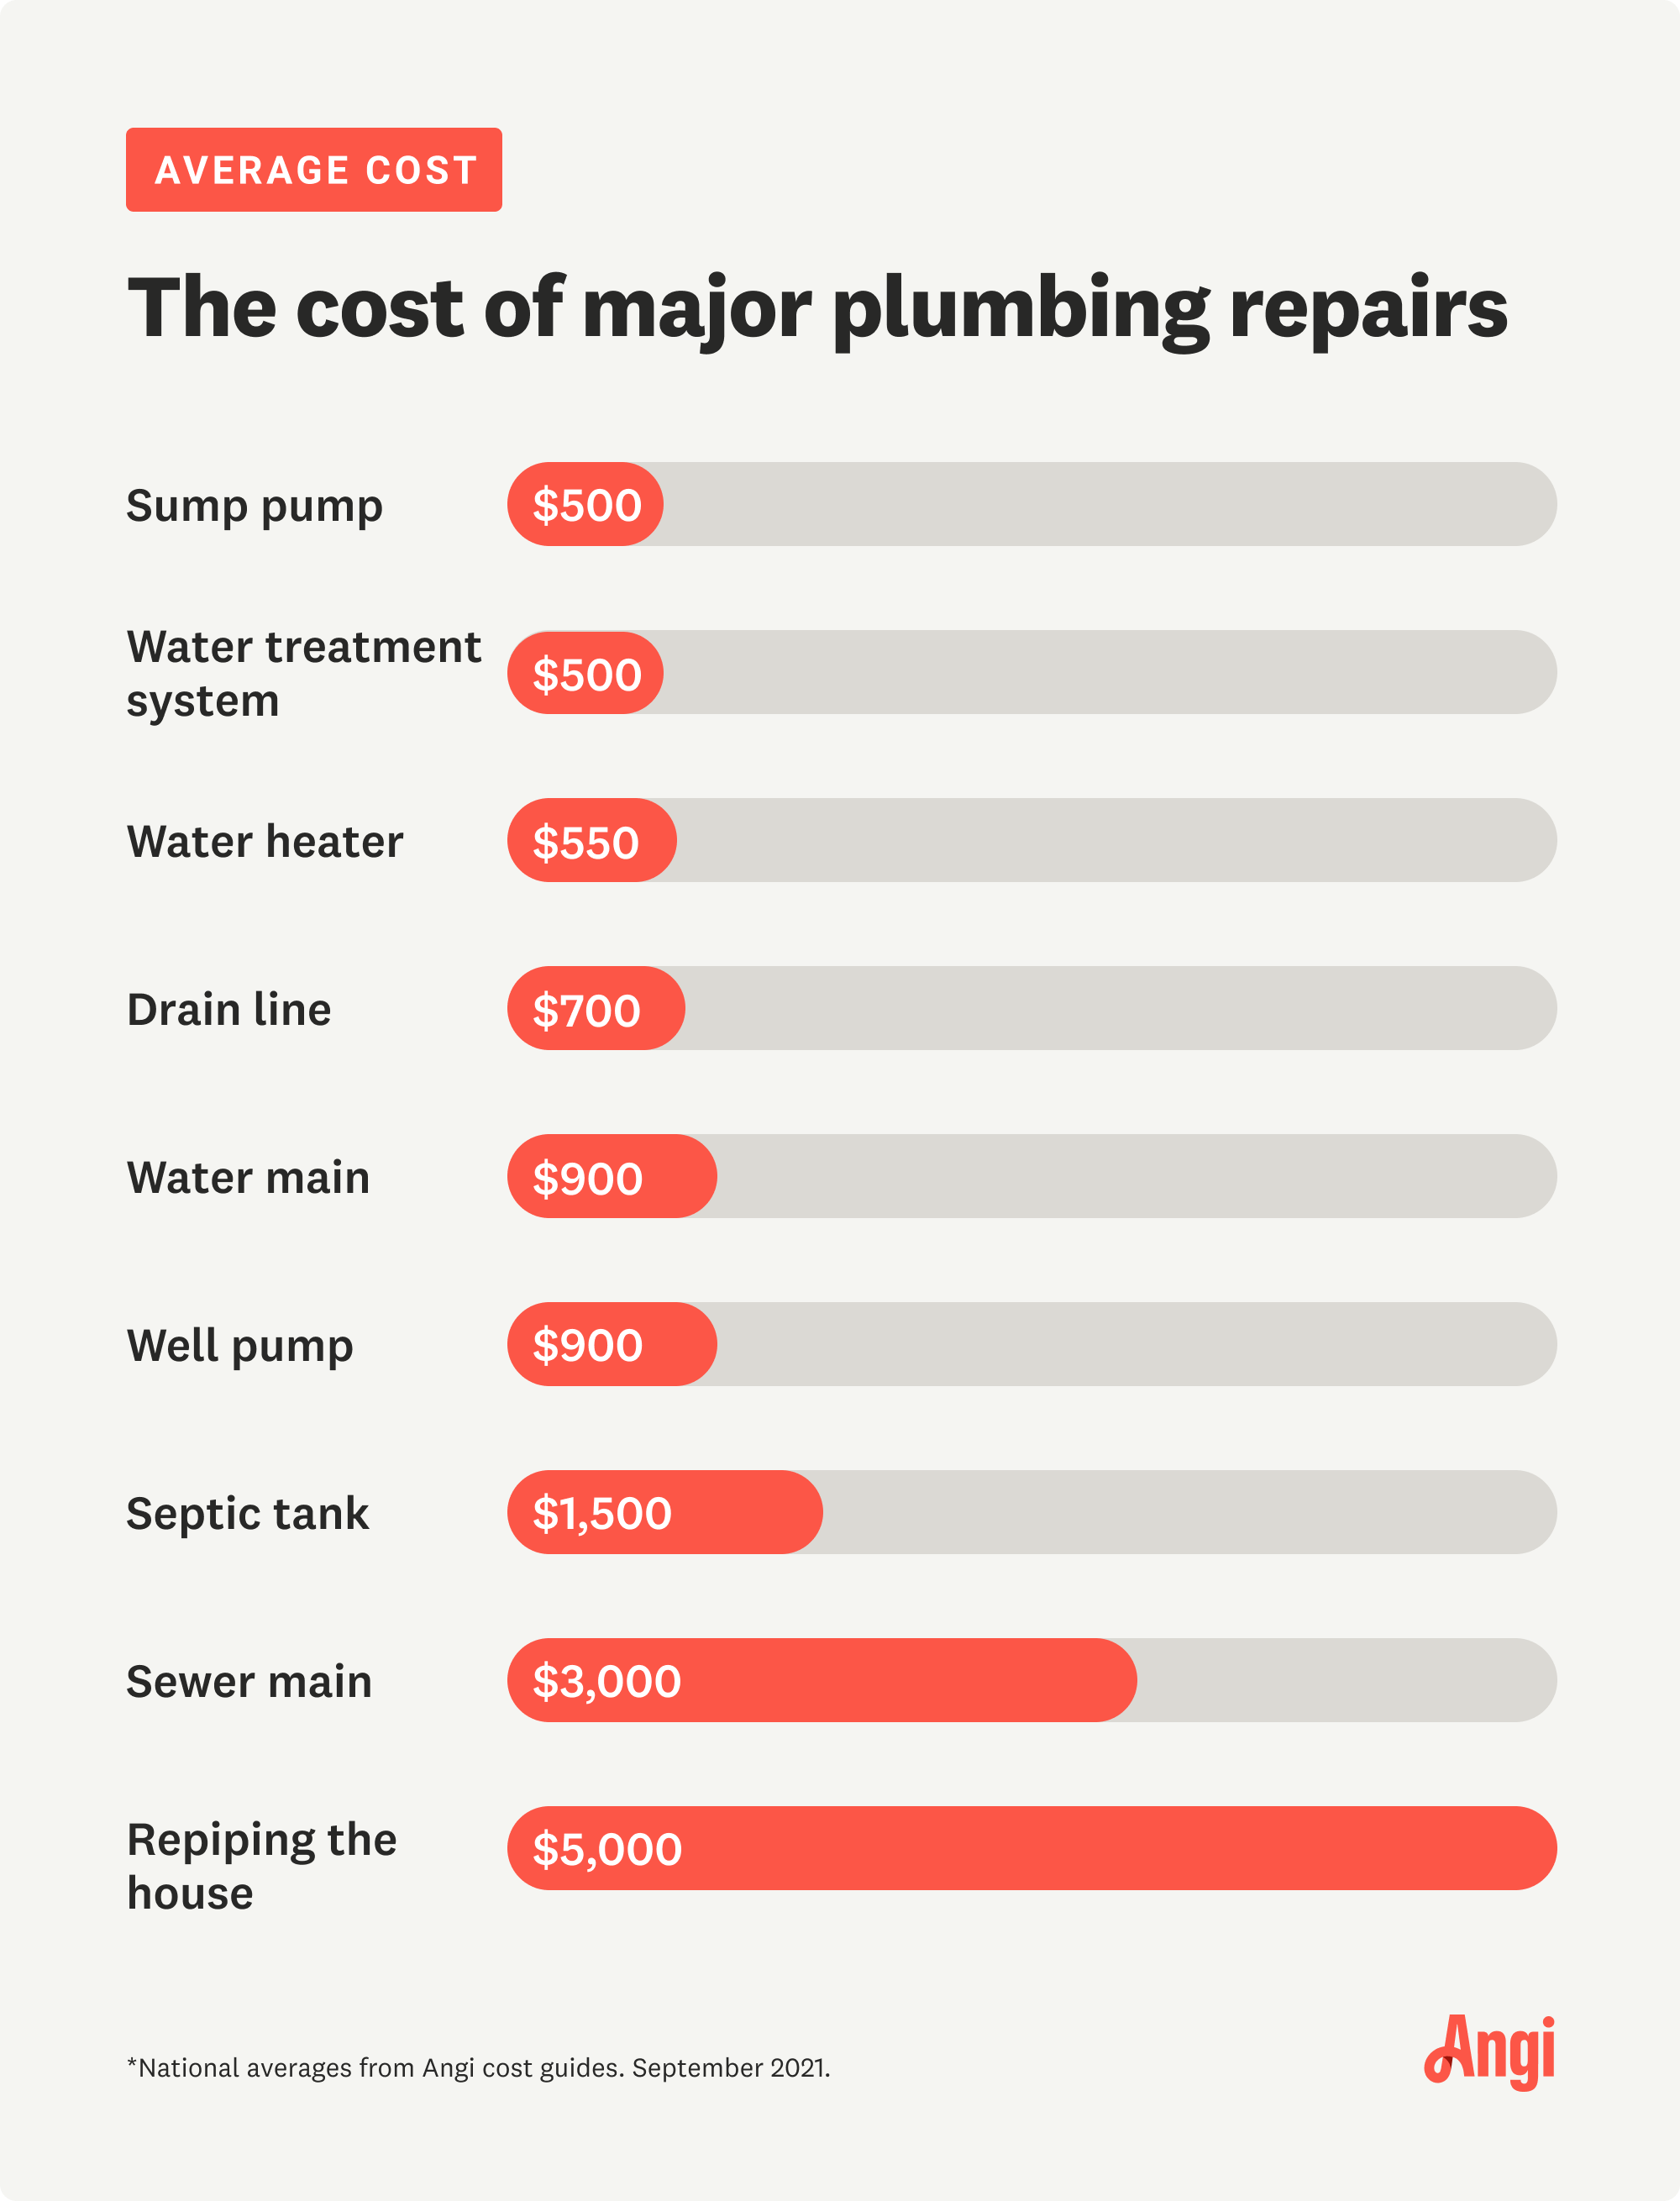 Average costs for 9 major plumbing repairs, with a drain line averaging at $700